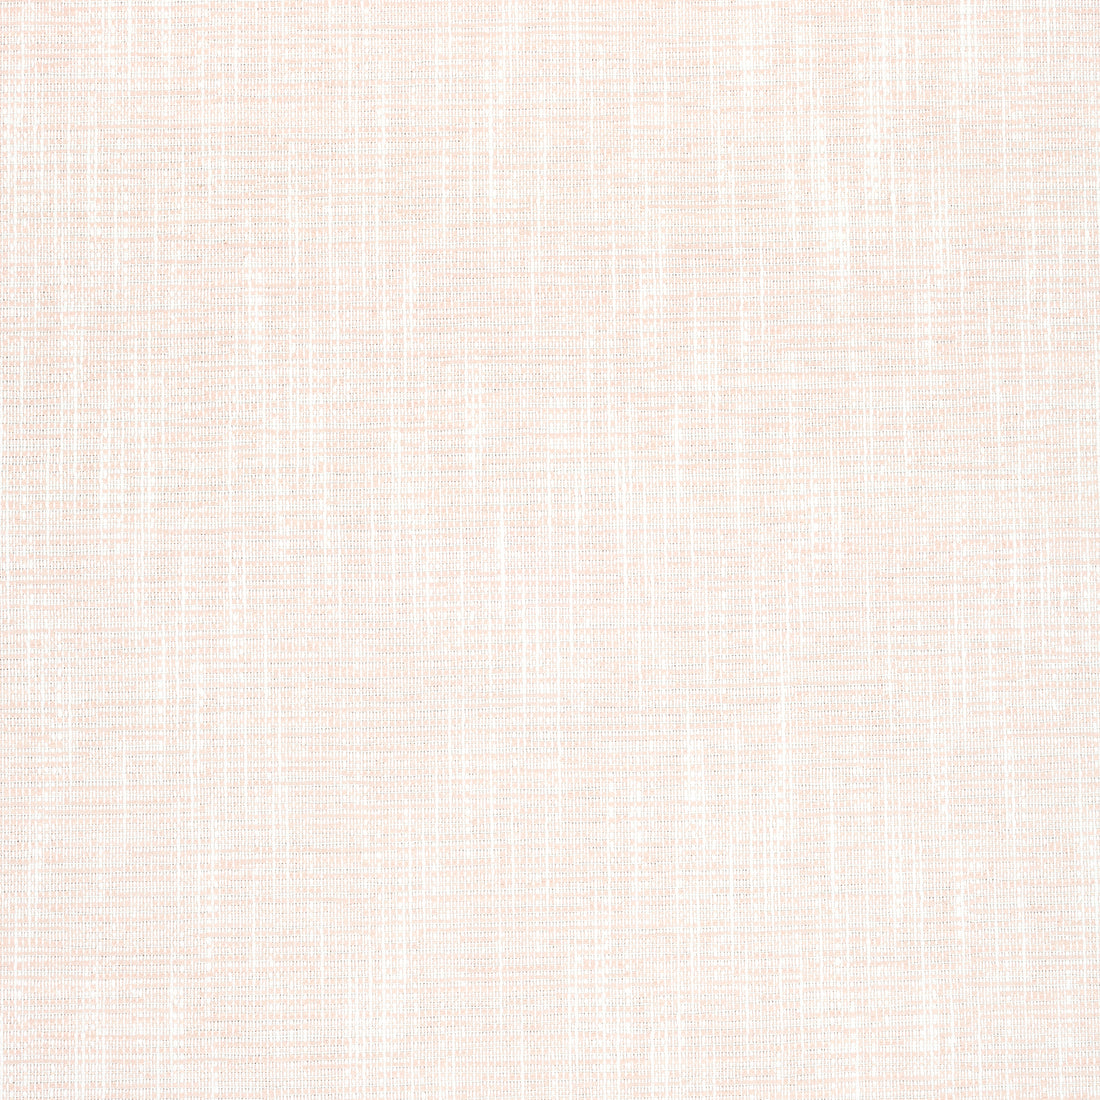 Piper fabric in blush color - pattern number W73451 - by Thibaut in the Landmark Textures collection